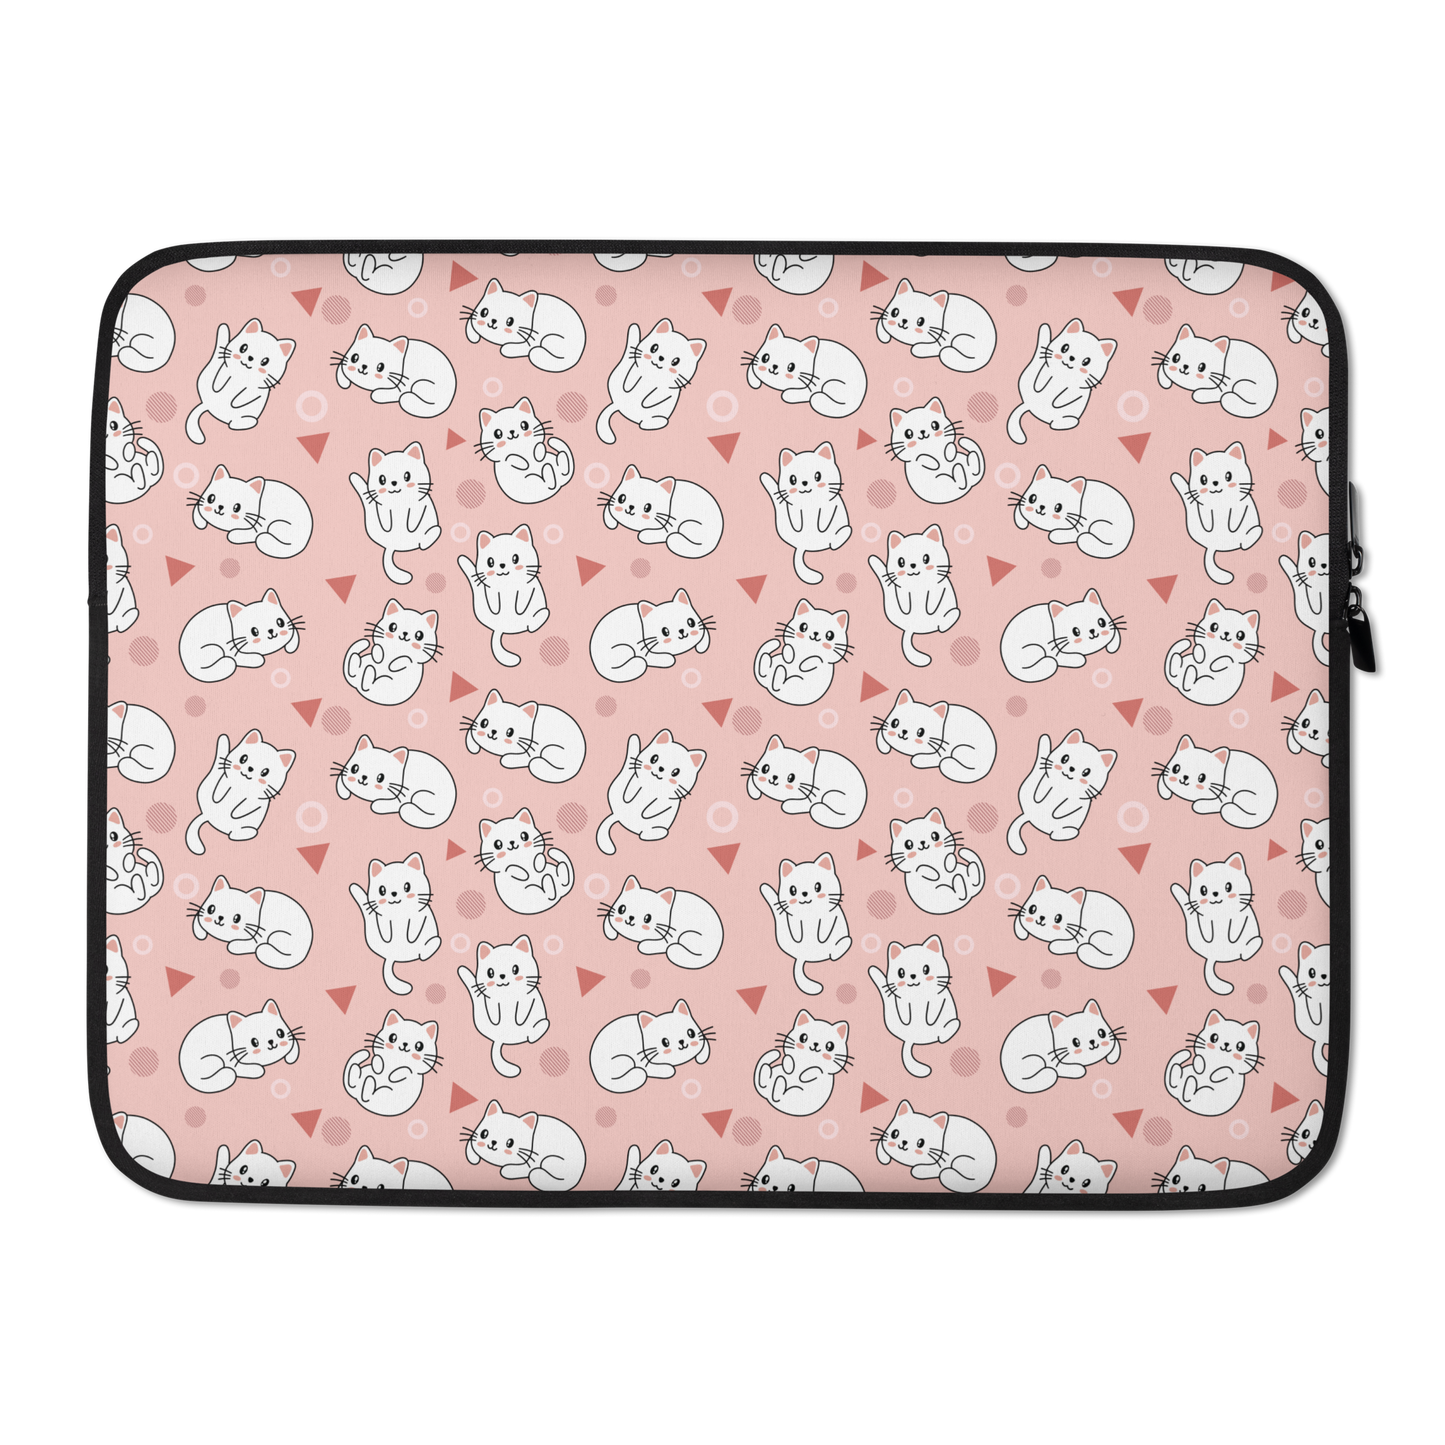 Laptop Sleeve 13" or 15" | Cute White Cat Theme with Pink Background